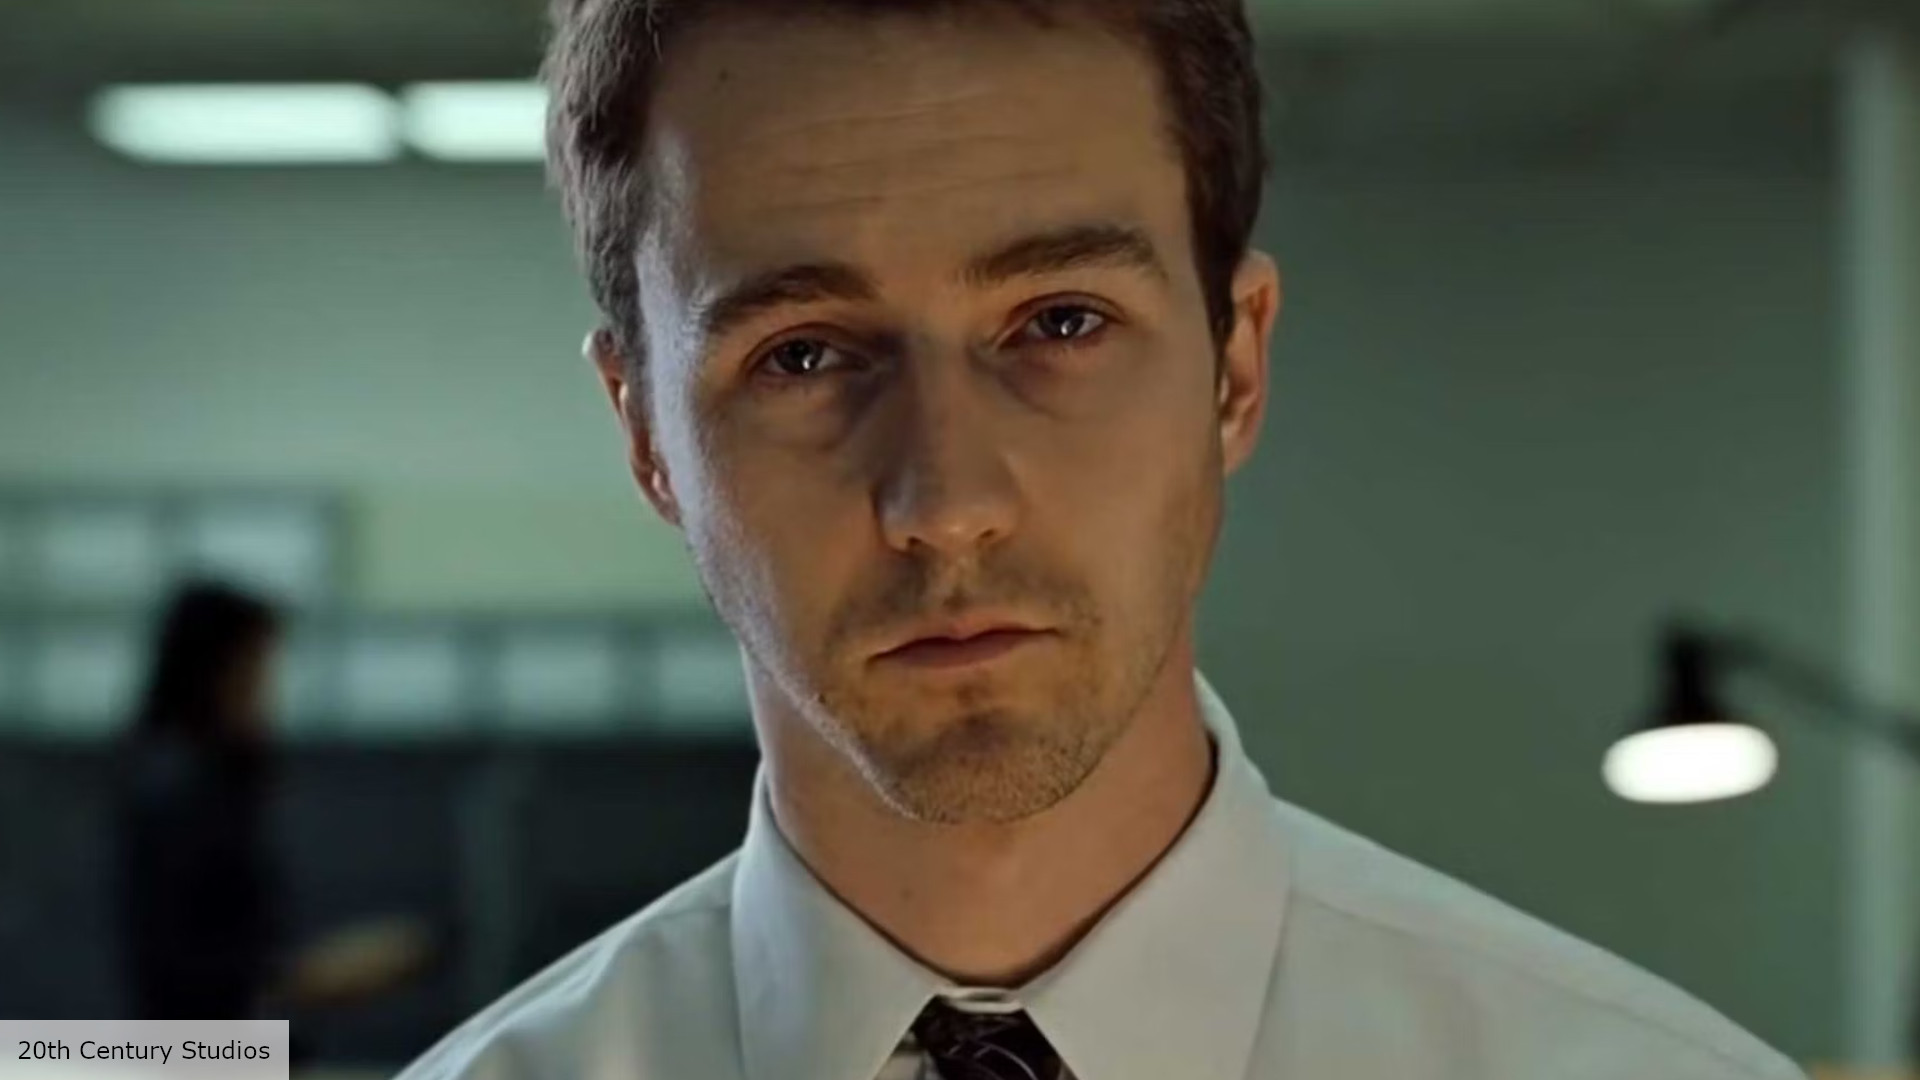 Fight Club s ending changed because David Fincher said it was too dark